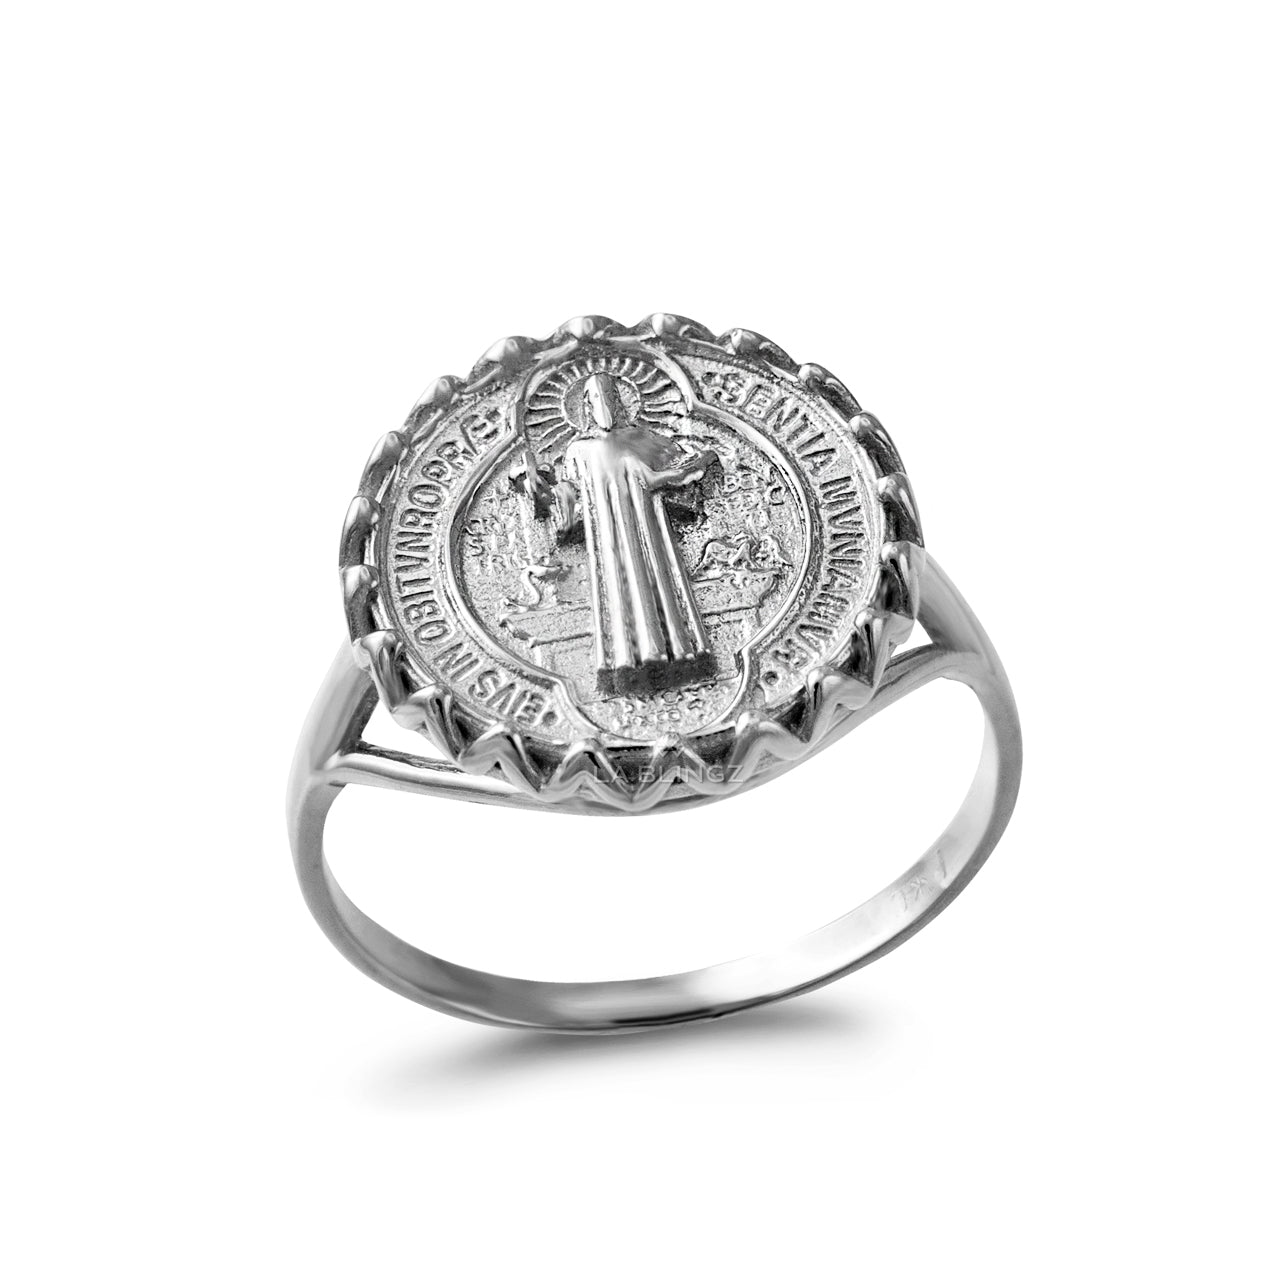 Solid Gold St. Benedict Coin Medallion Ring for Women